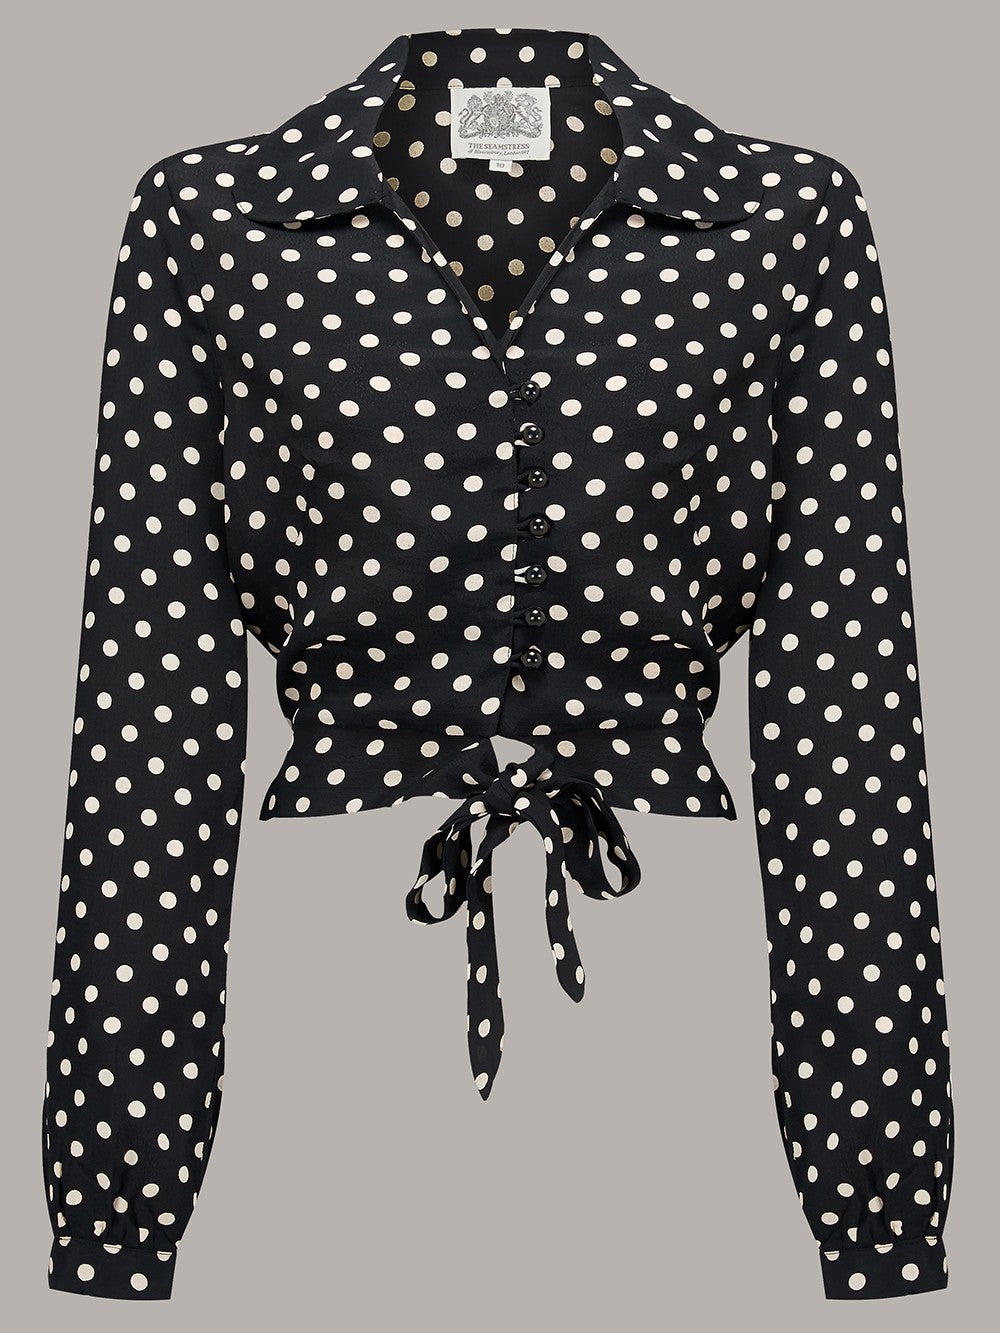 Margaret Blouse in Black and White Spots